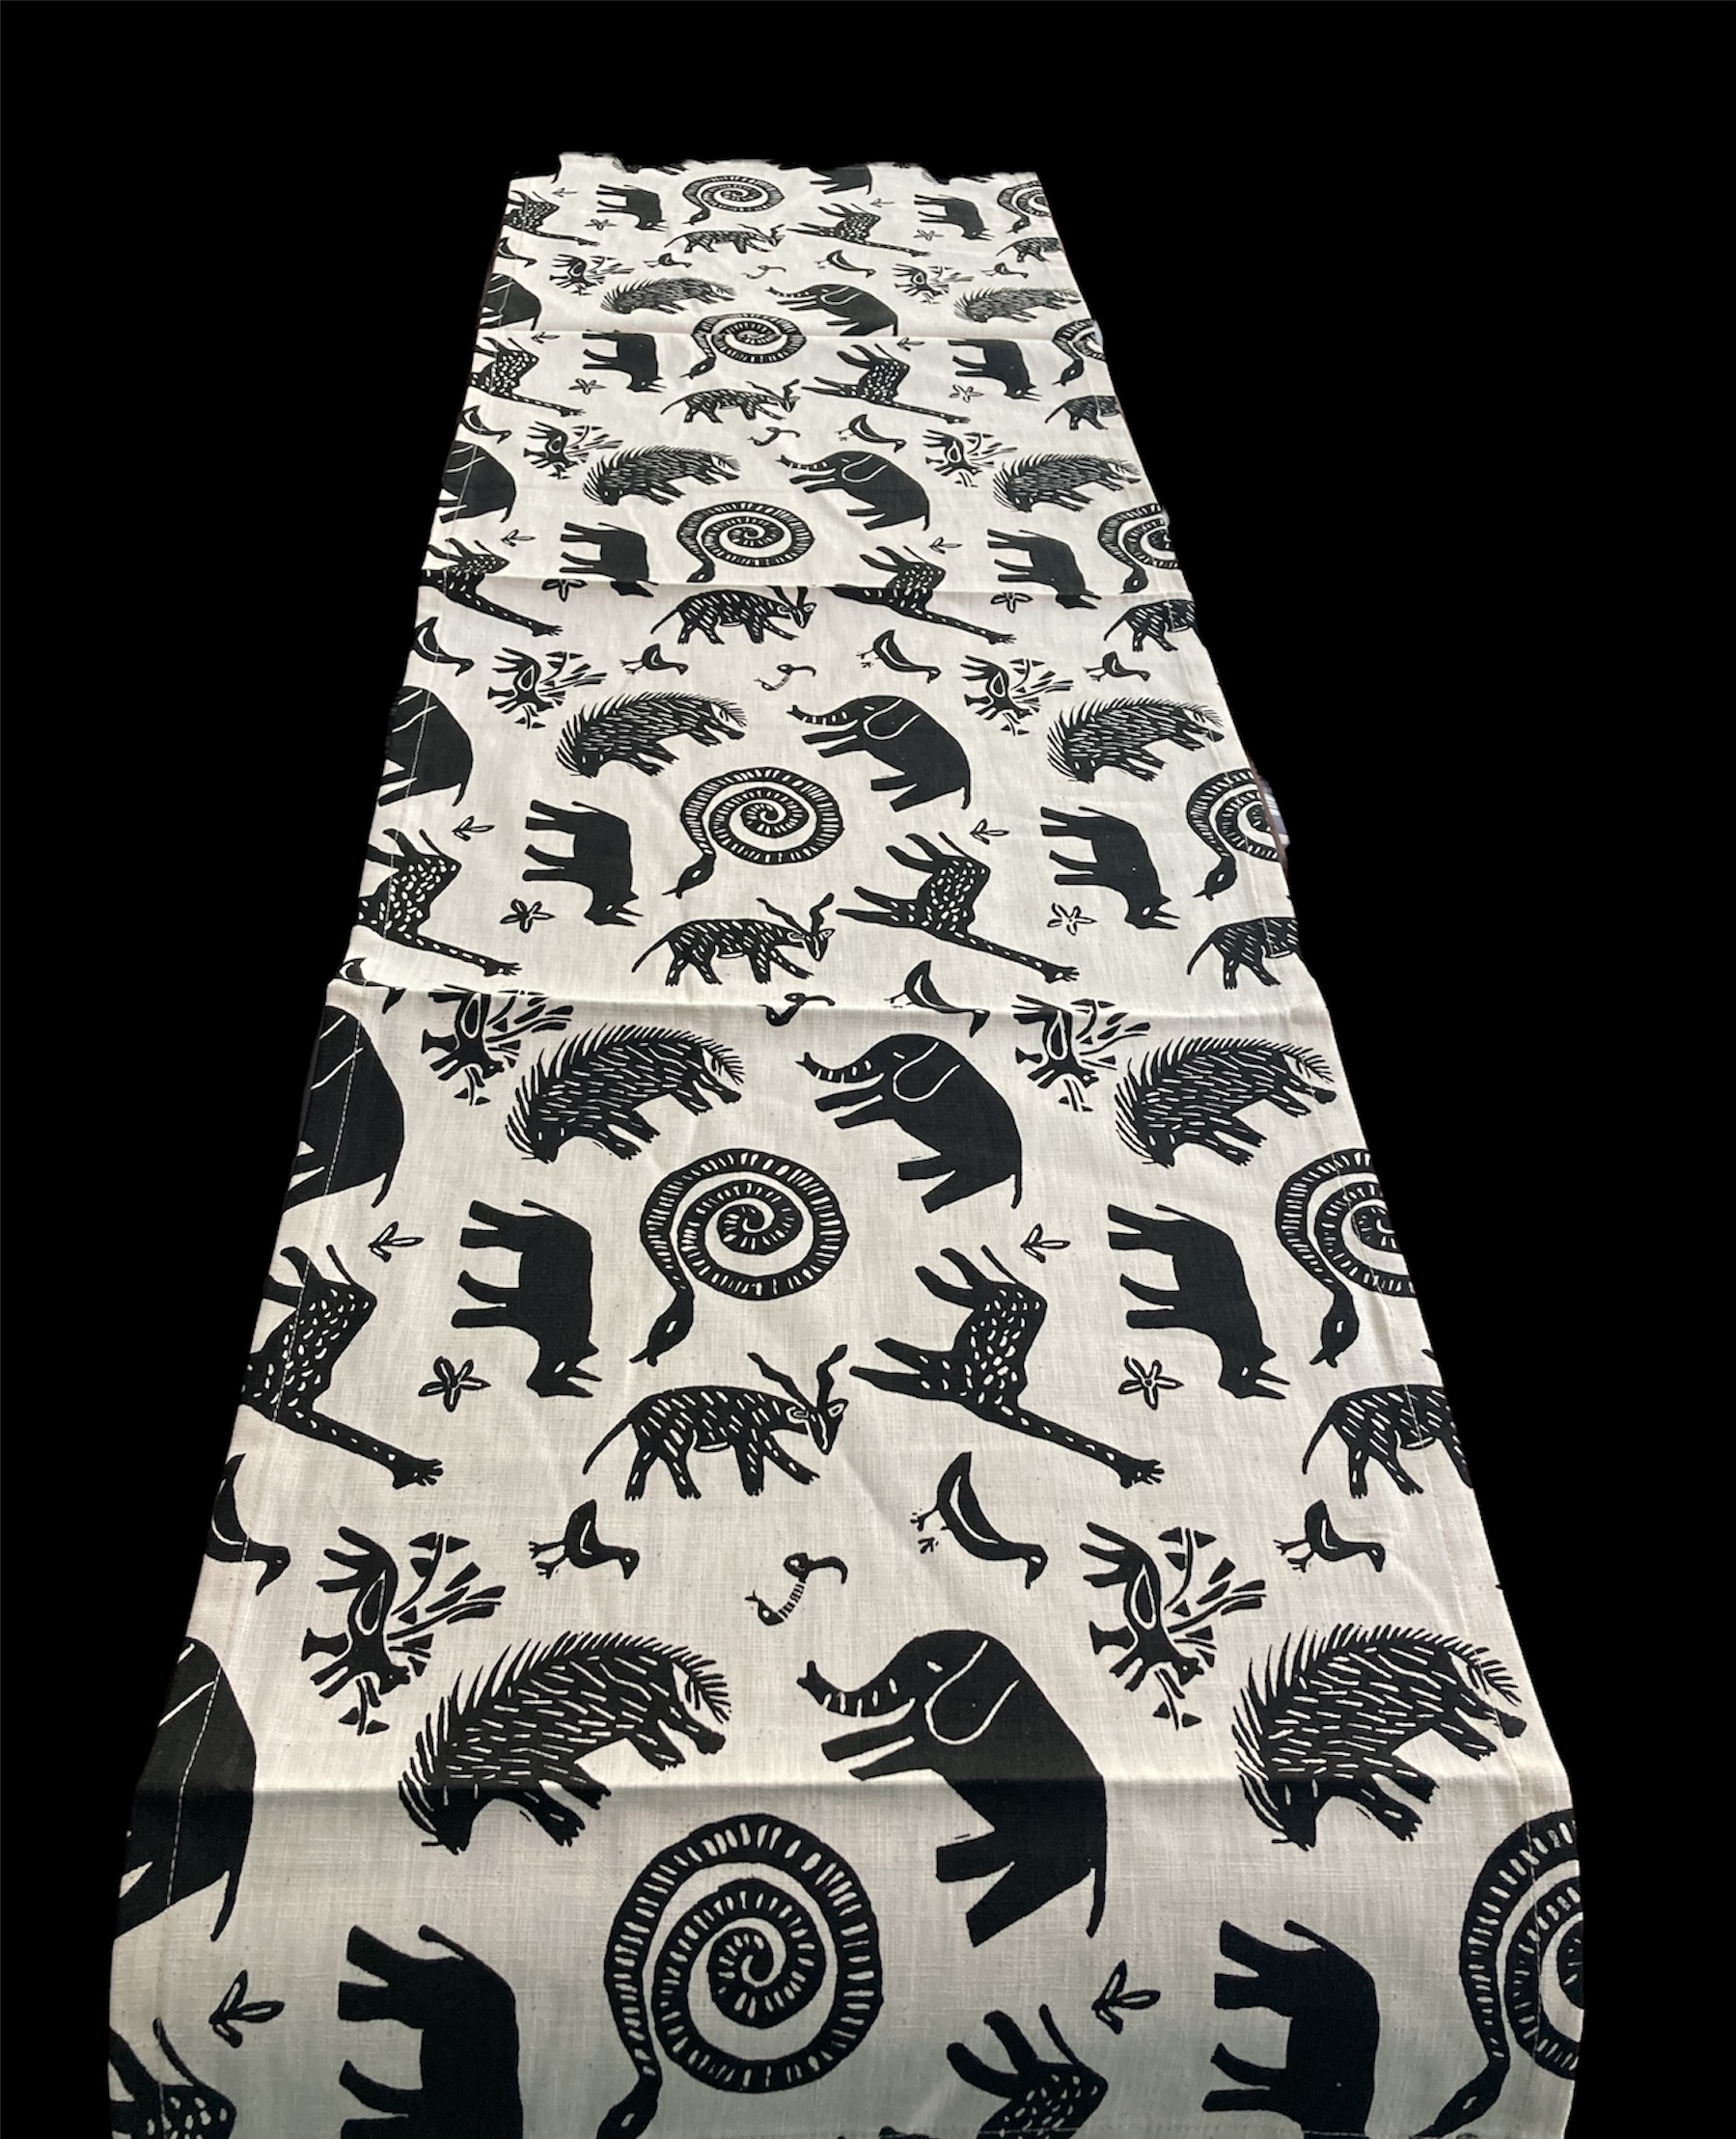 100% cotton Table Runner 58\" x 16\" from Namibia - Design bw03s